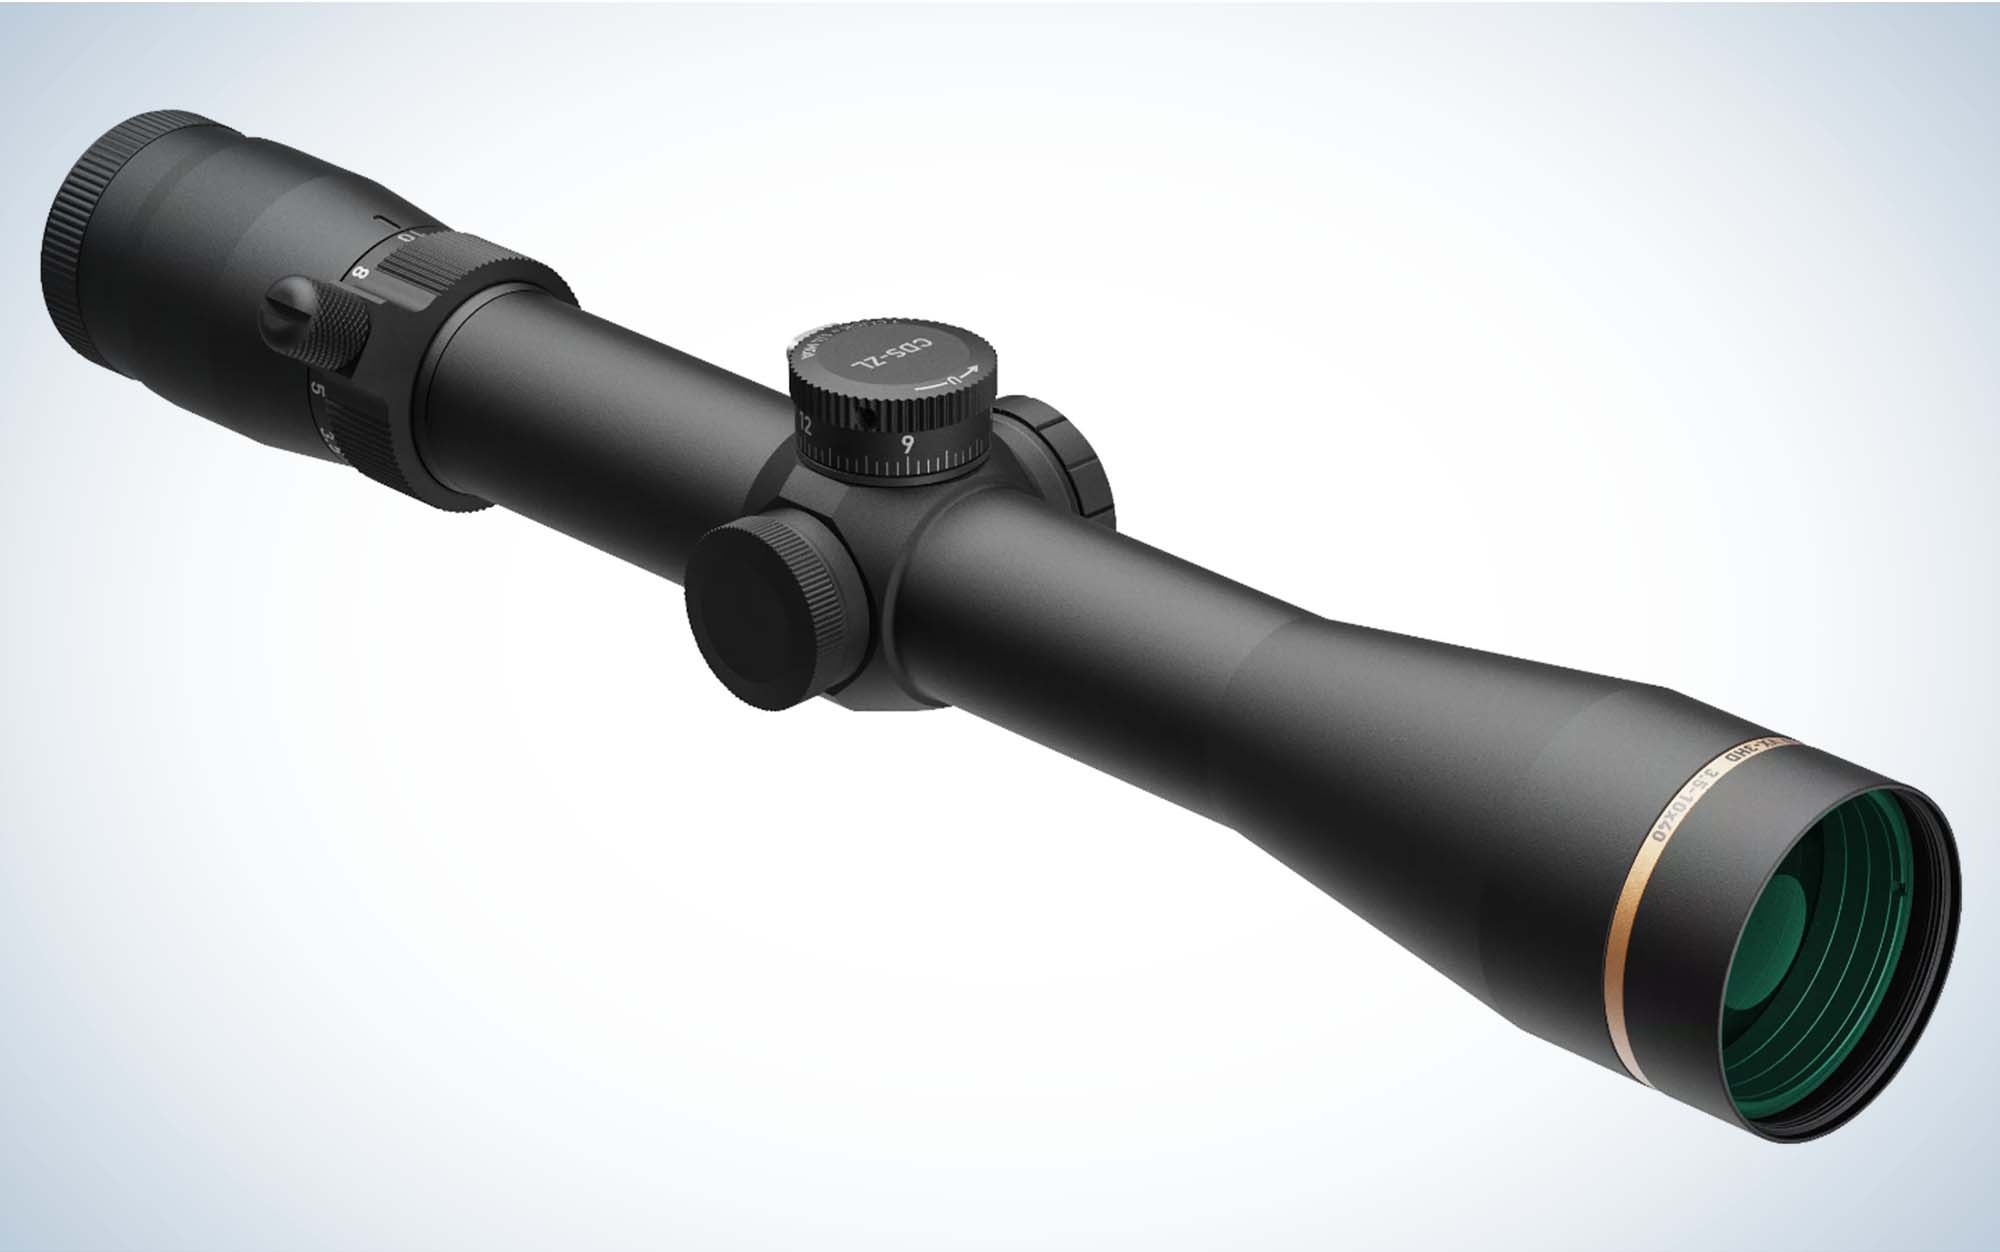 The Leupold VX is the best all-around rifle scope.